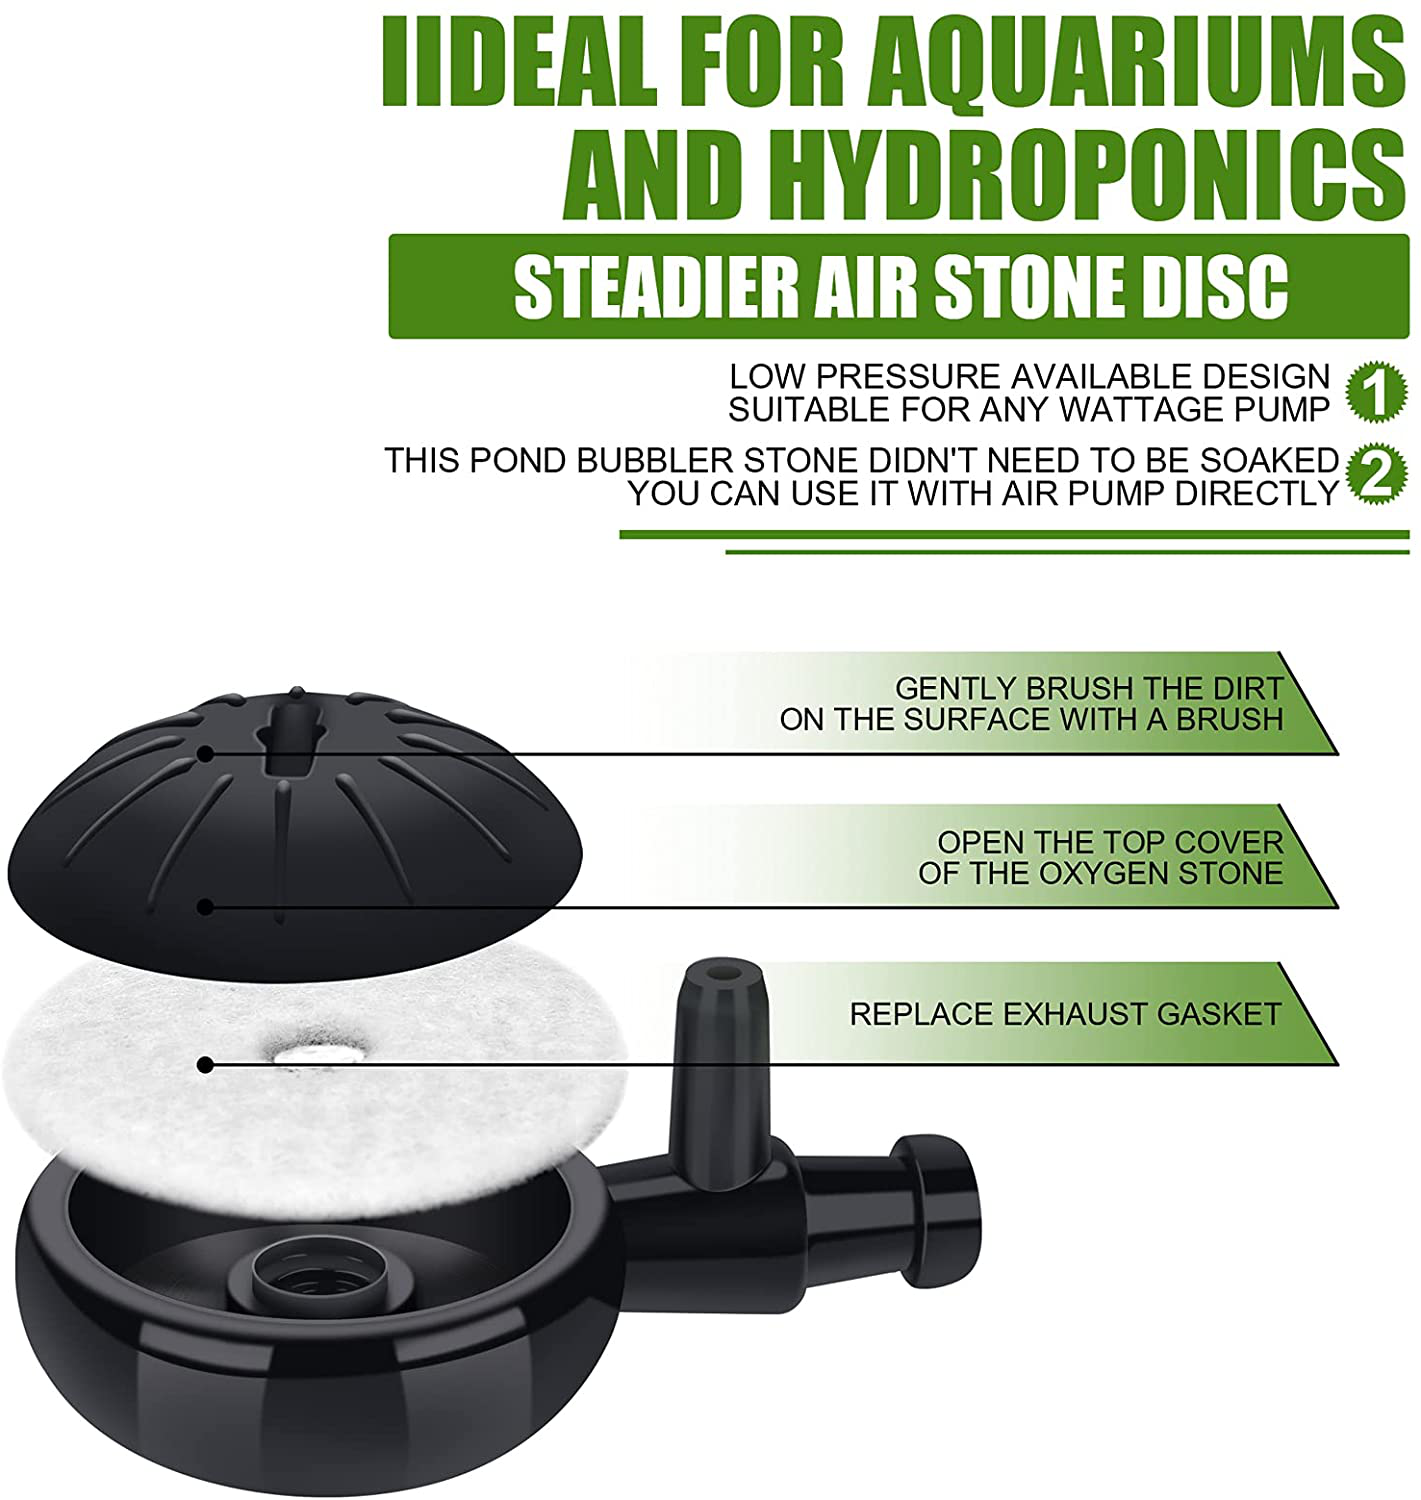 Minwen 2 Inch Air Stone Fish Tank Bubble Stone Kit with Strong Sucker and Control Valve Quiet High Dissolved Oxygen Diffuser Makes Tiny and Dense Bubbles for Aquarium Fish Tank (2 Pack) Animals & Pet Supplies > Pet Supplies > Fish Supplies > Aquarium Air Stones & Diffusers MinWen   